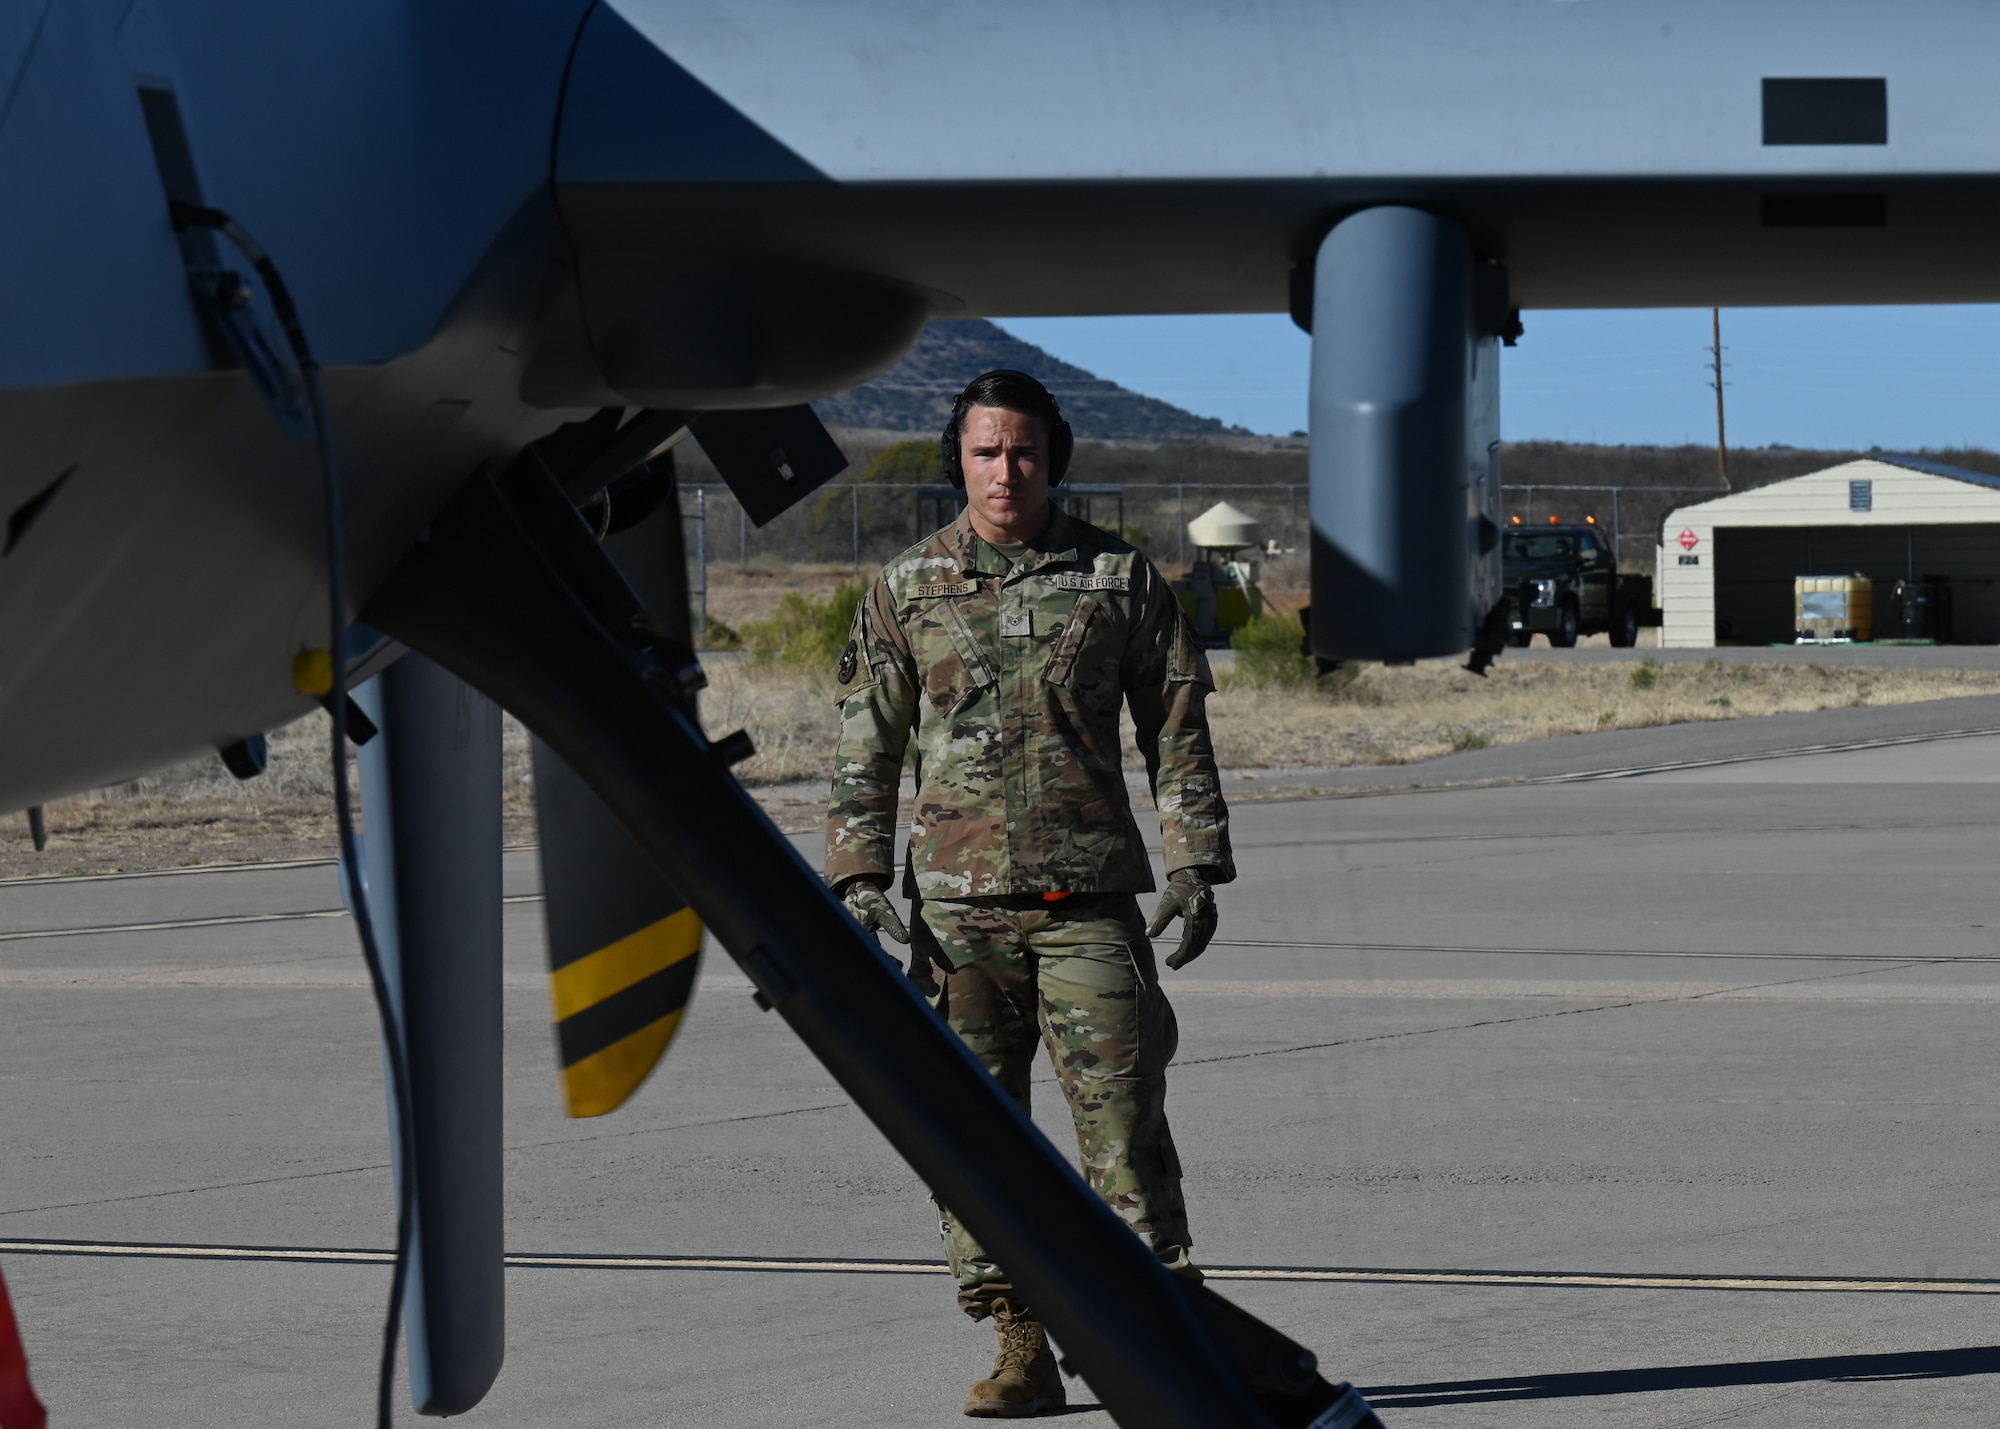 A U.S. Air Force fire protection personnel confirms fire safety of the MQ-9 Reaper unmanned aerial vehicle during Exercise Agile Angel at Fort Huachuca, Ariz., Feb. 20, 2024. Fire protection personnel were specifically trained in aircraft rescue and fire fighting, making them capable on the flight line. (U.S. Air Force photo by Staff Sgt. Abbey Rieves)